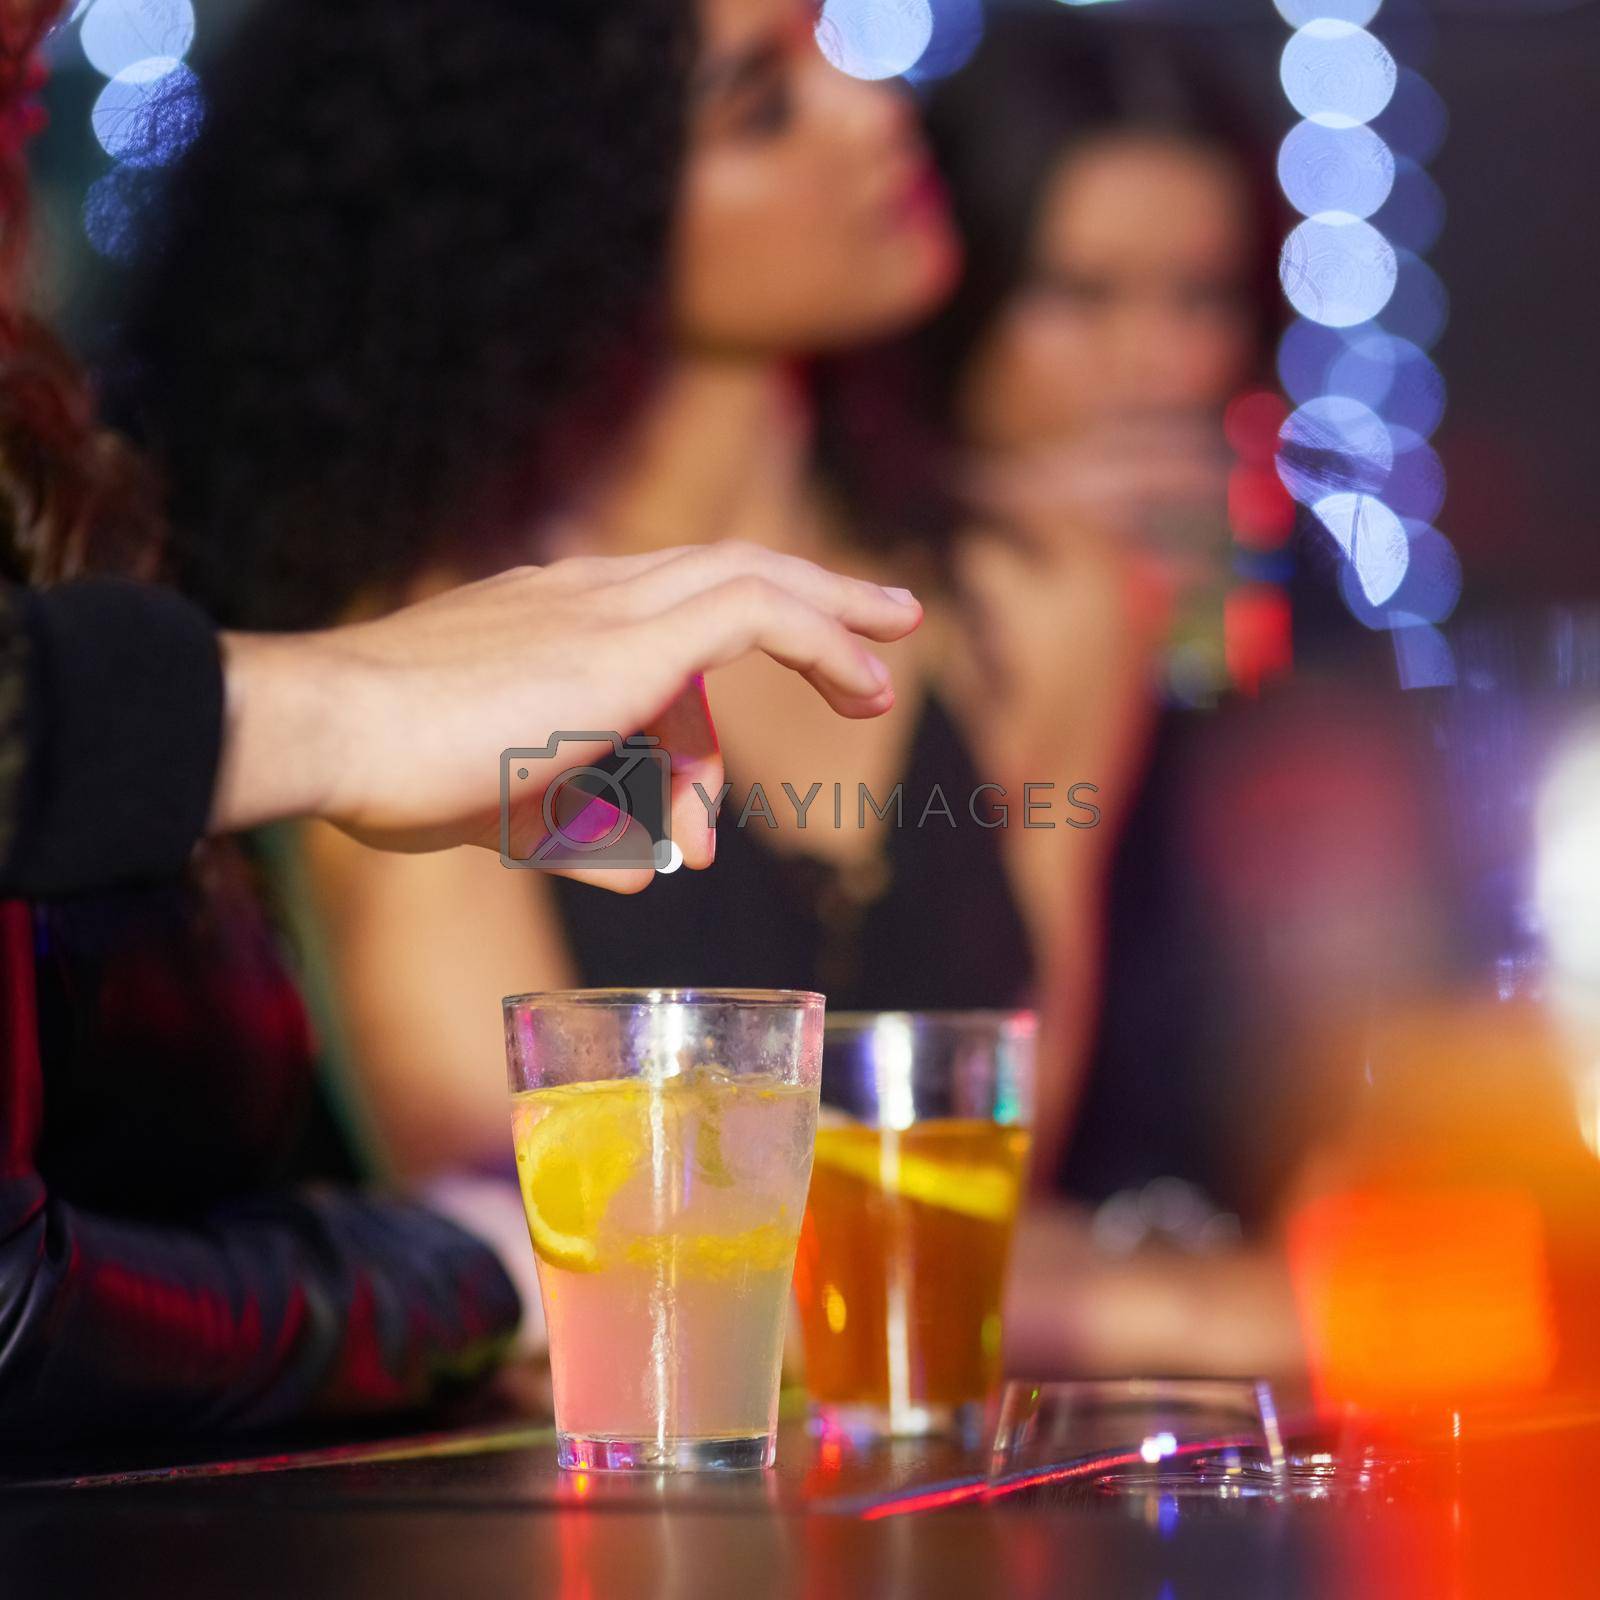 Closeup shot of a man drugging a womans drink in a nightclub.